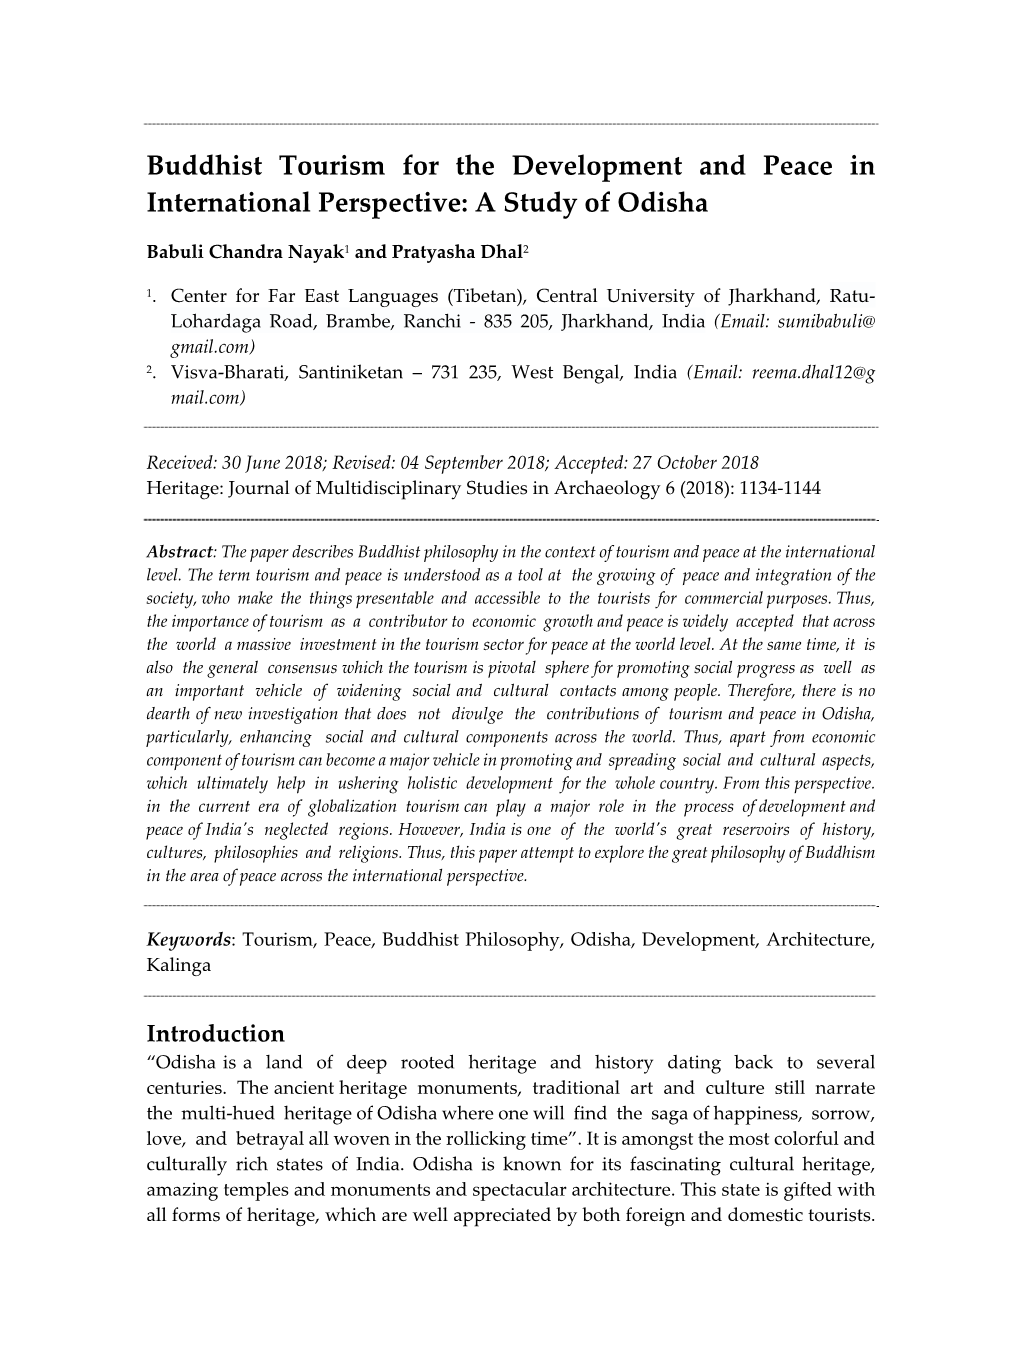 Buddhist Tourism for the Development and Peace in International Perspective: a Study of Odisha